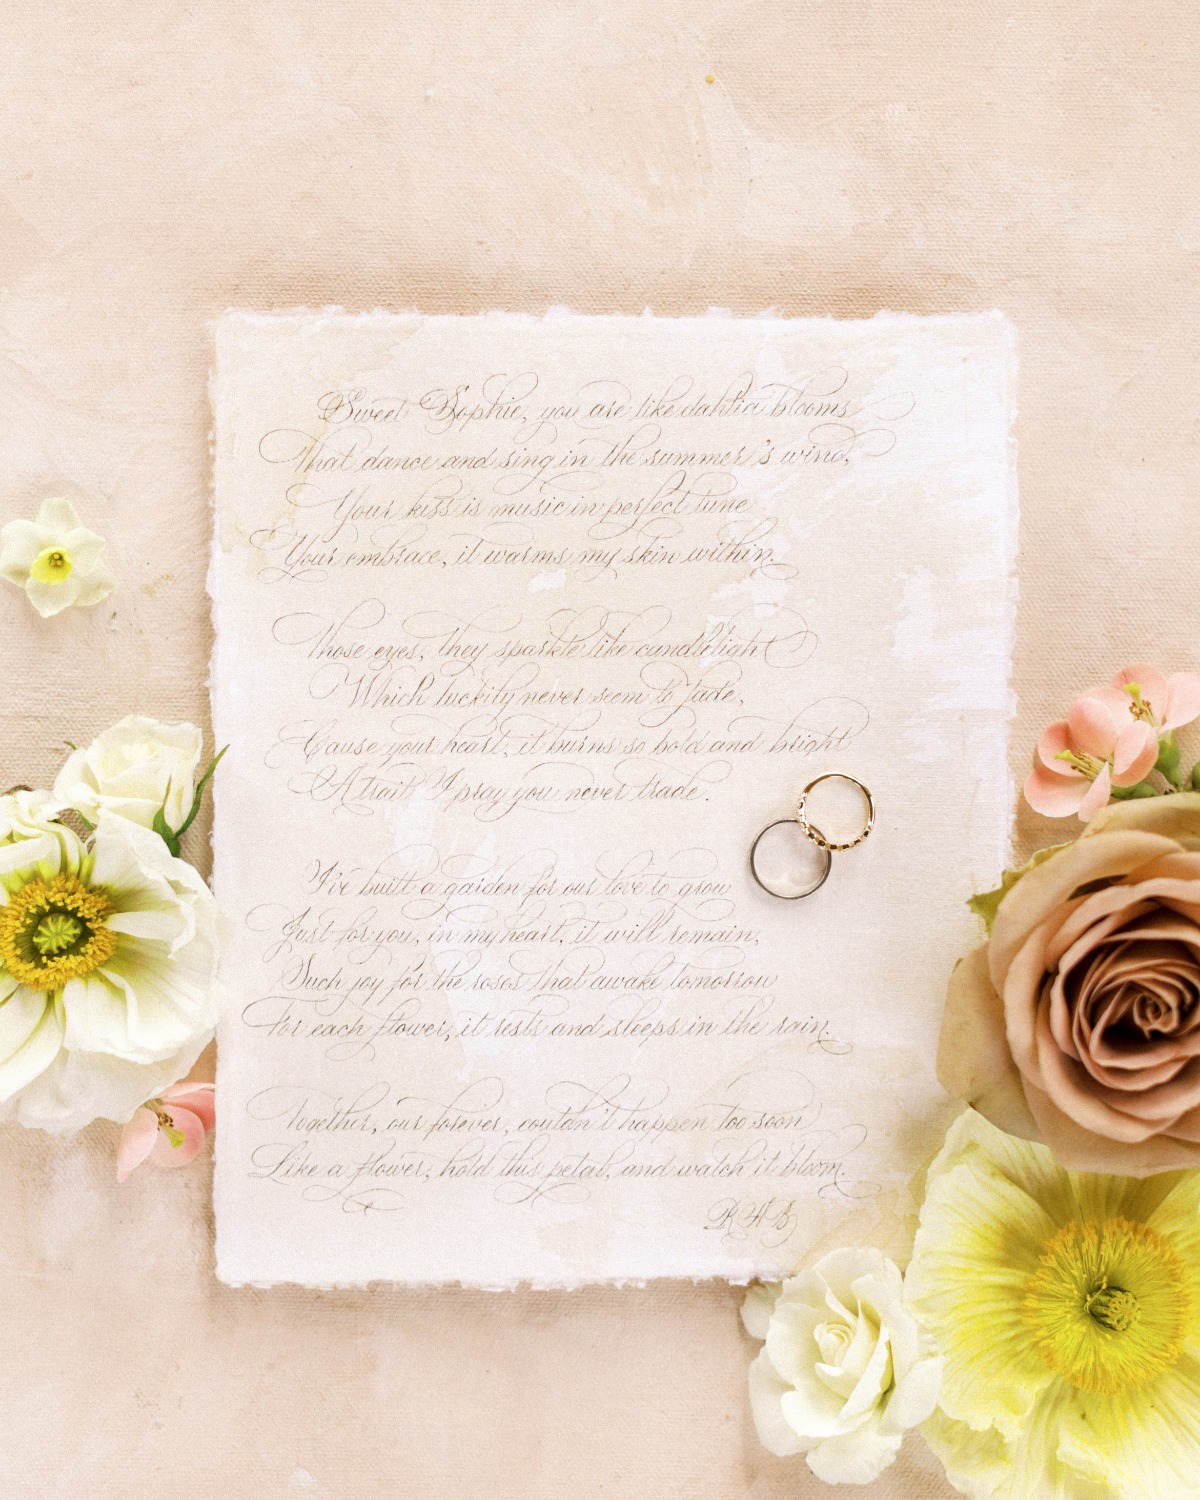 Aerial view of vows with wedding bands and flowers